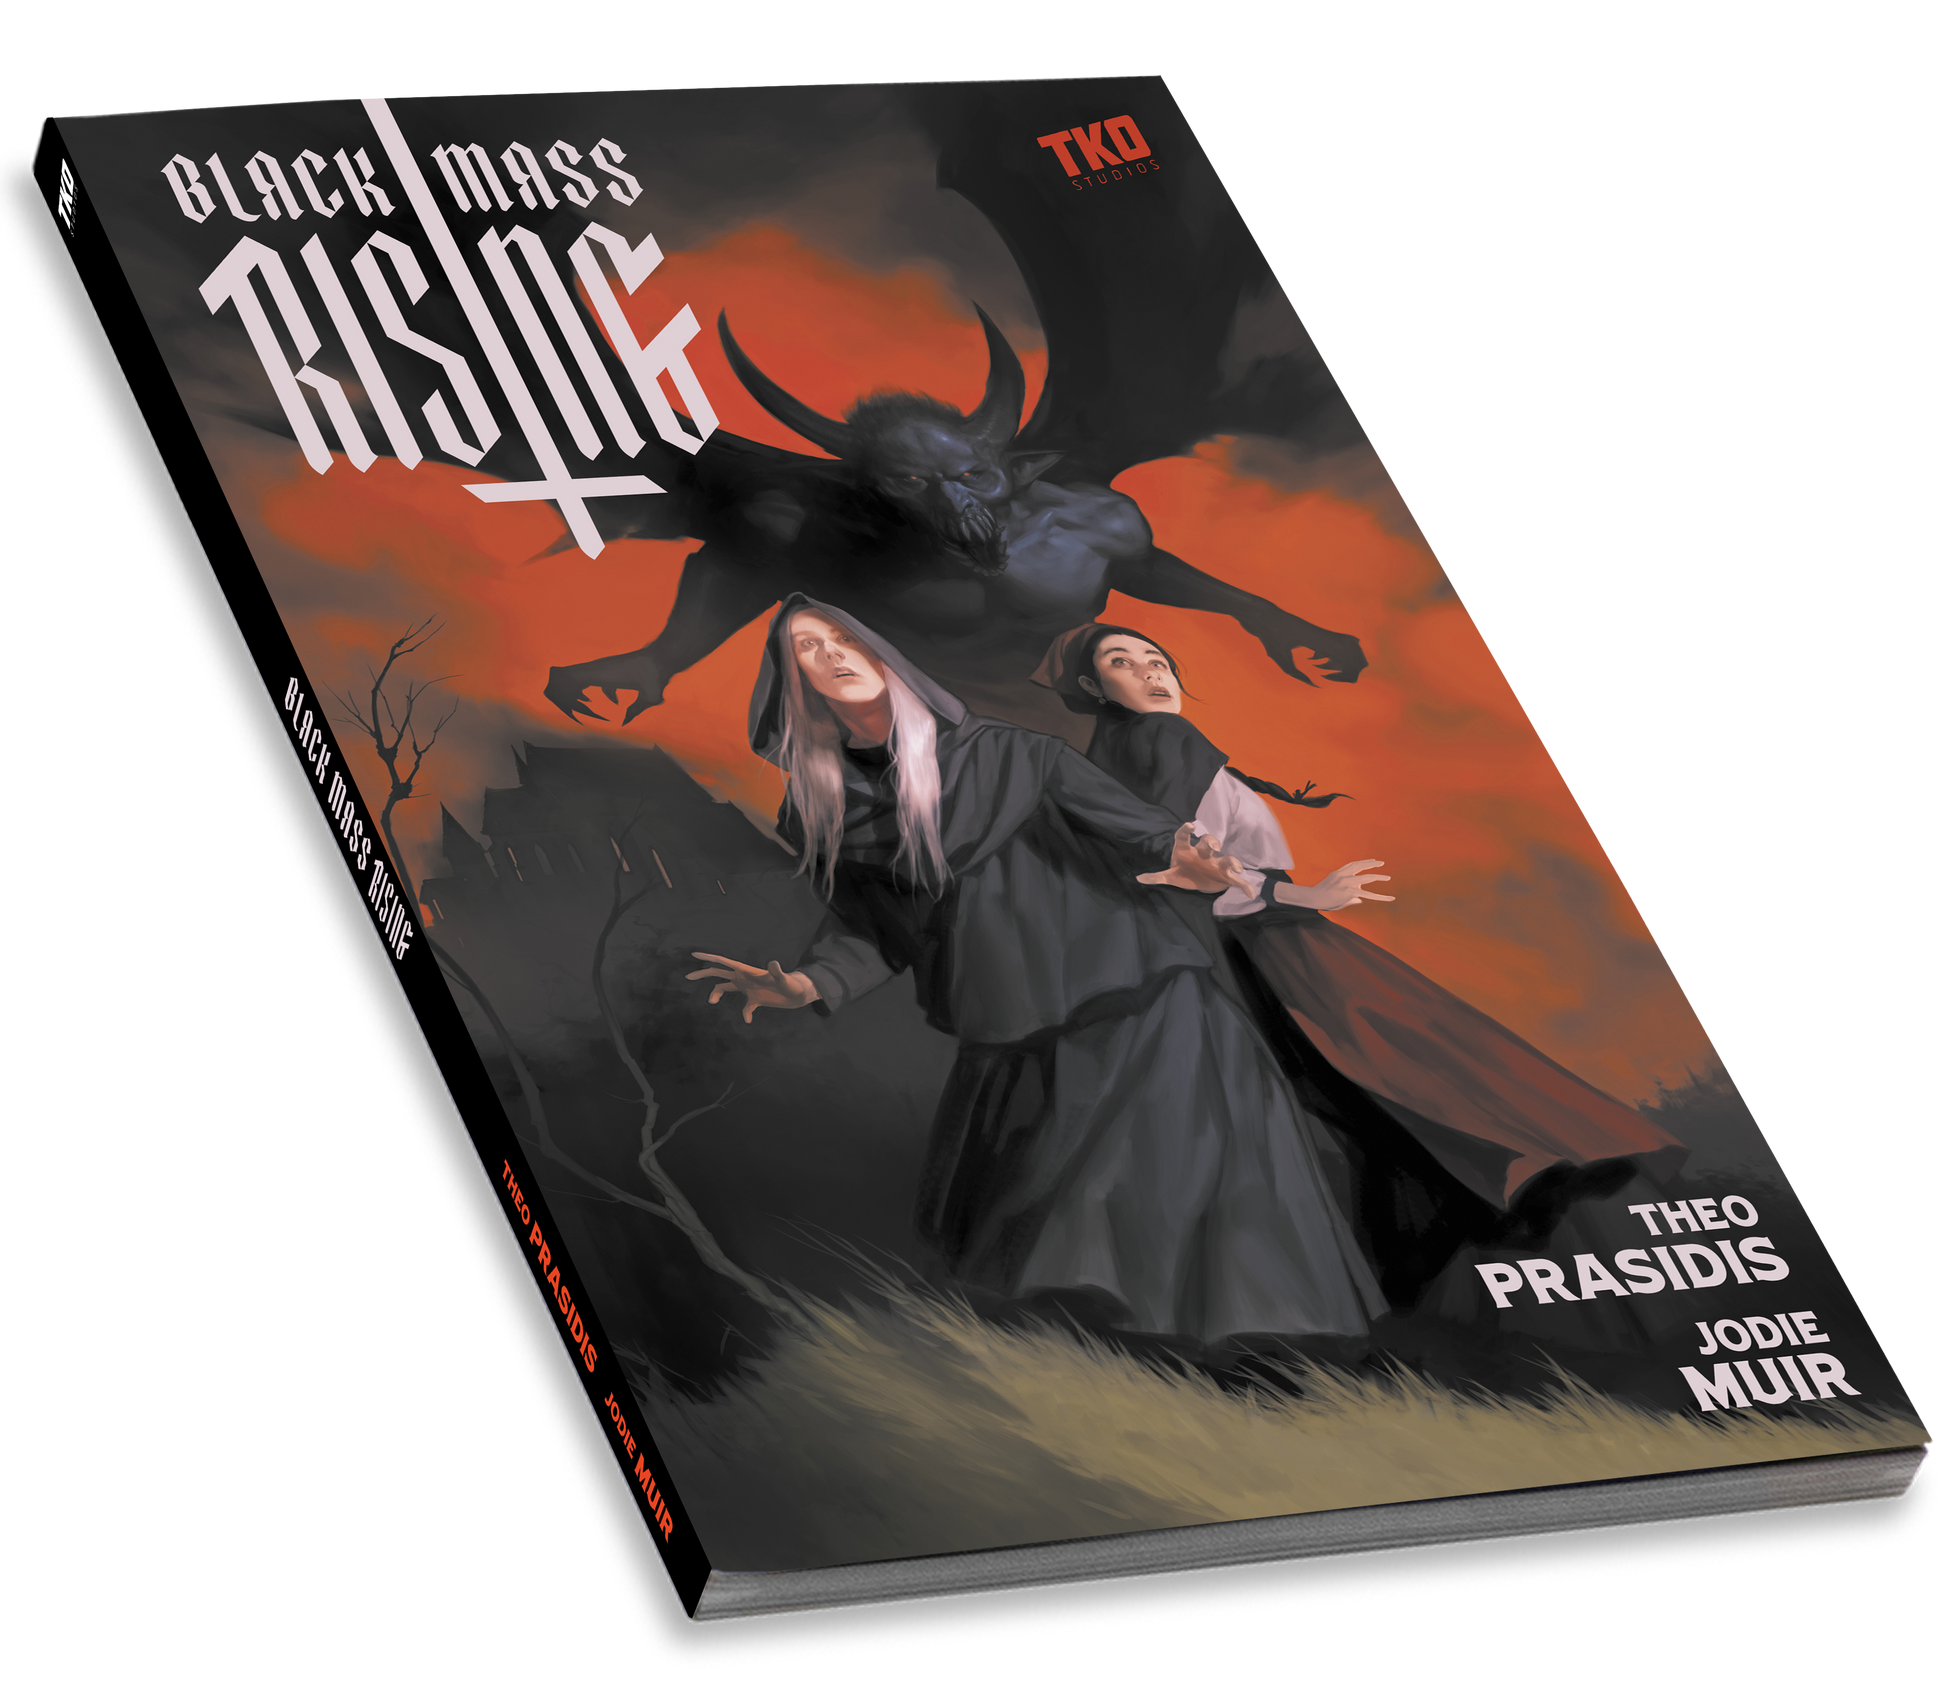 Cover of Black Mass Rising featuring two individuals looking frightened as a horned and winged creature stands menacingly behind them.